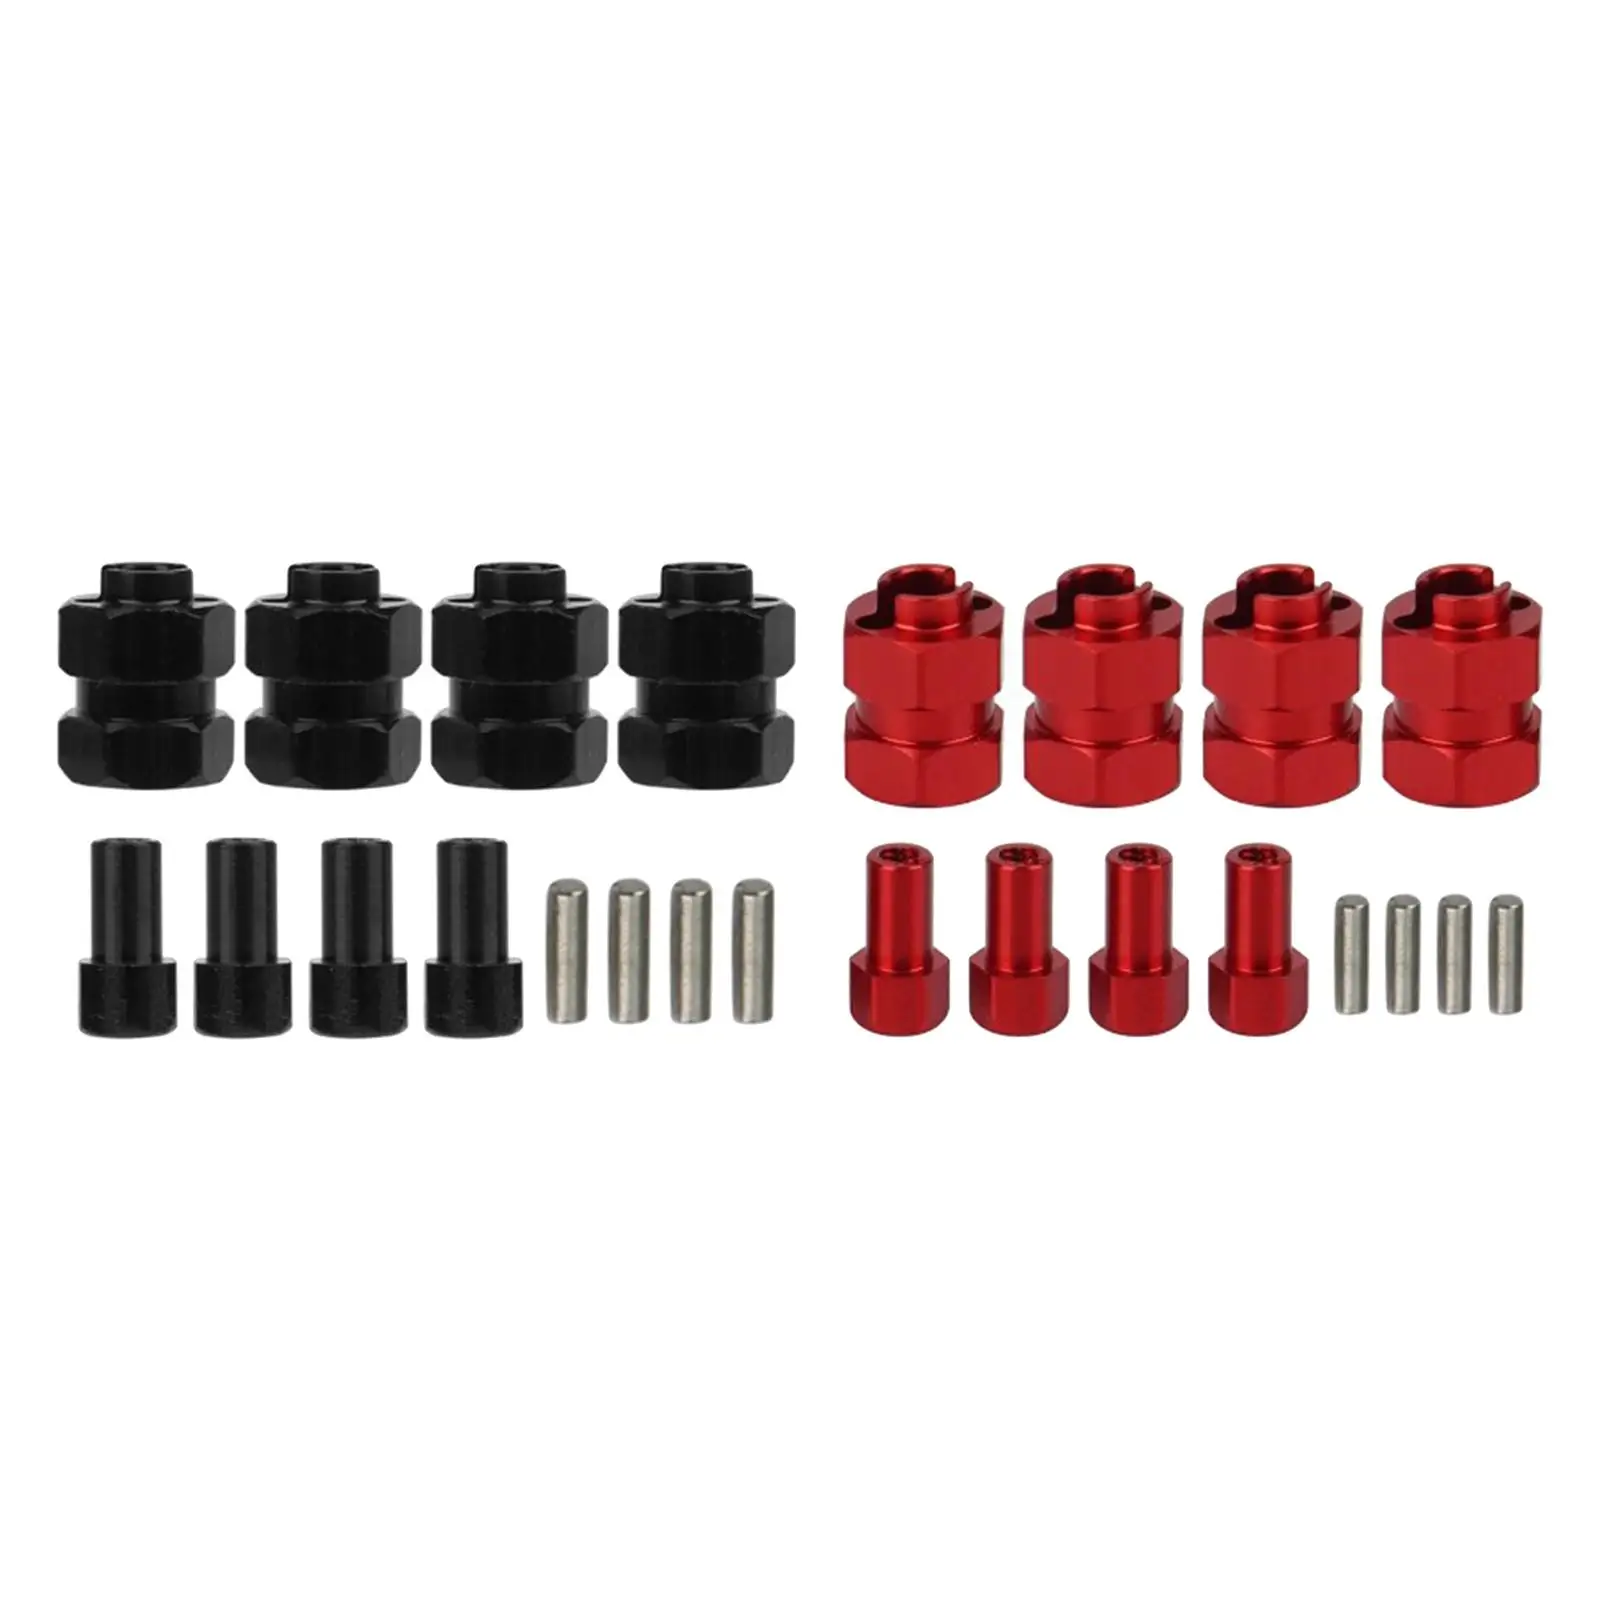 4x Brass Extended Hex Wheel Hubs Combiner Replacements for Axial Scx0081 DIY